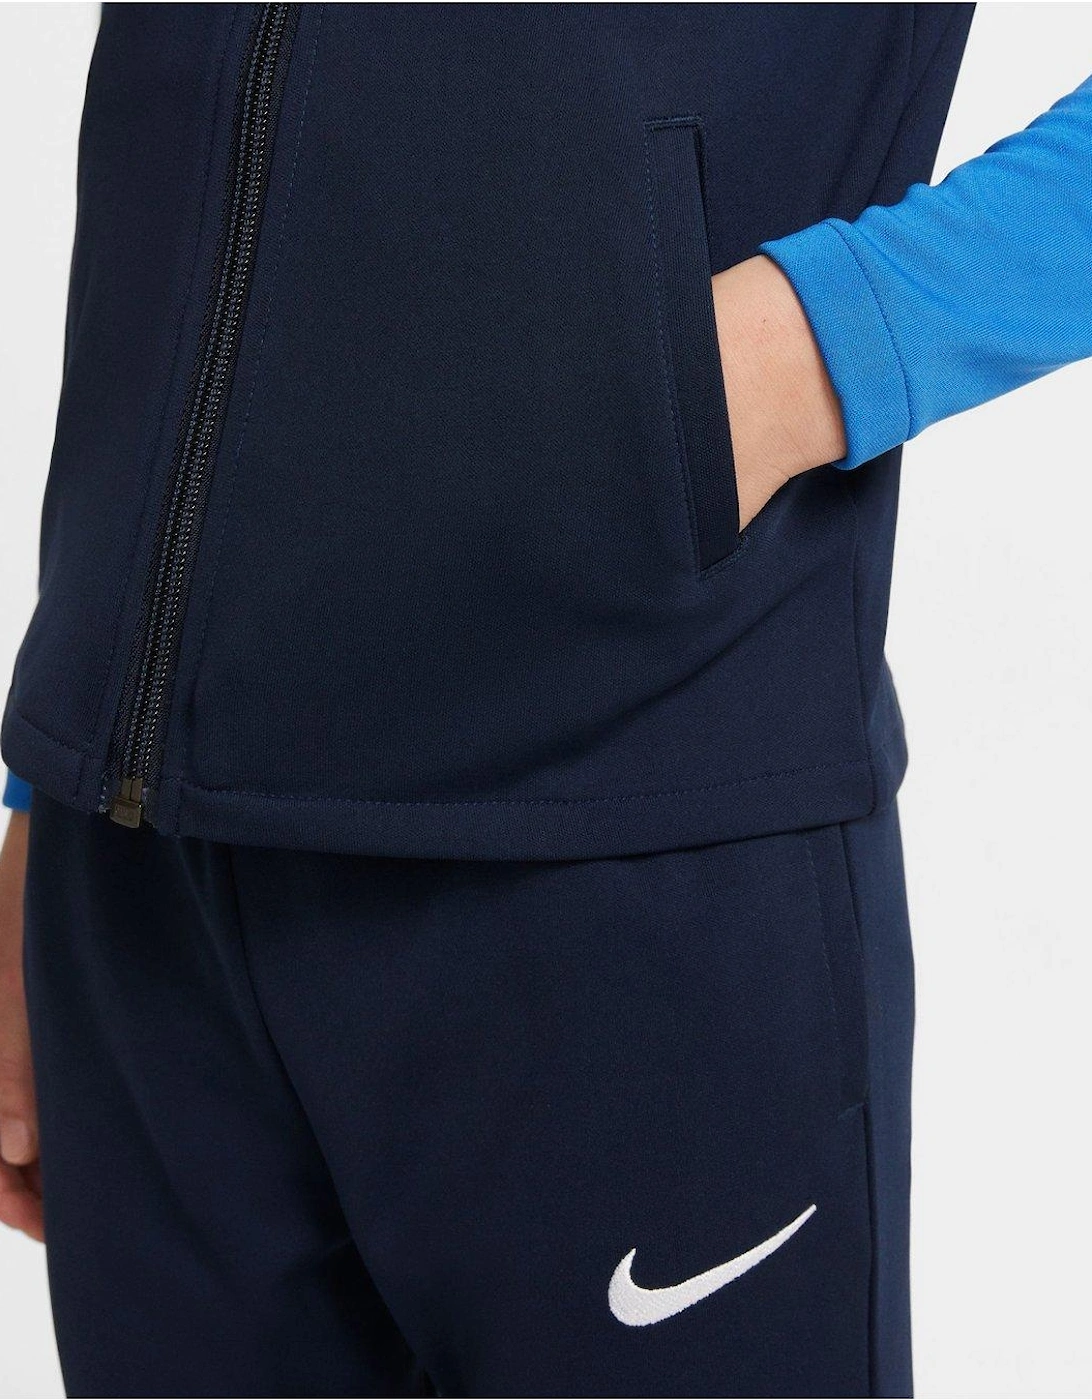 Younger Academy Tracksuit - Navy